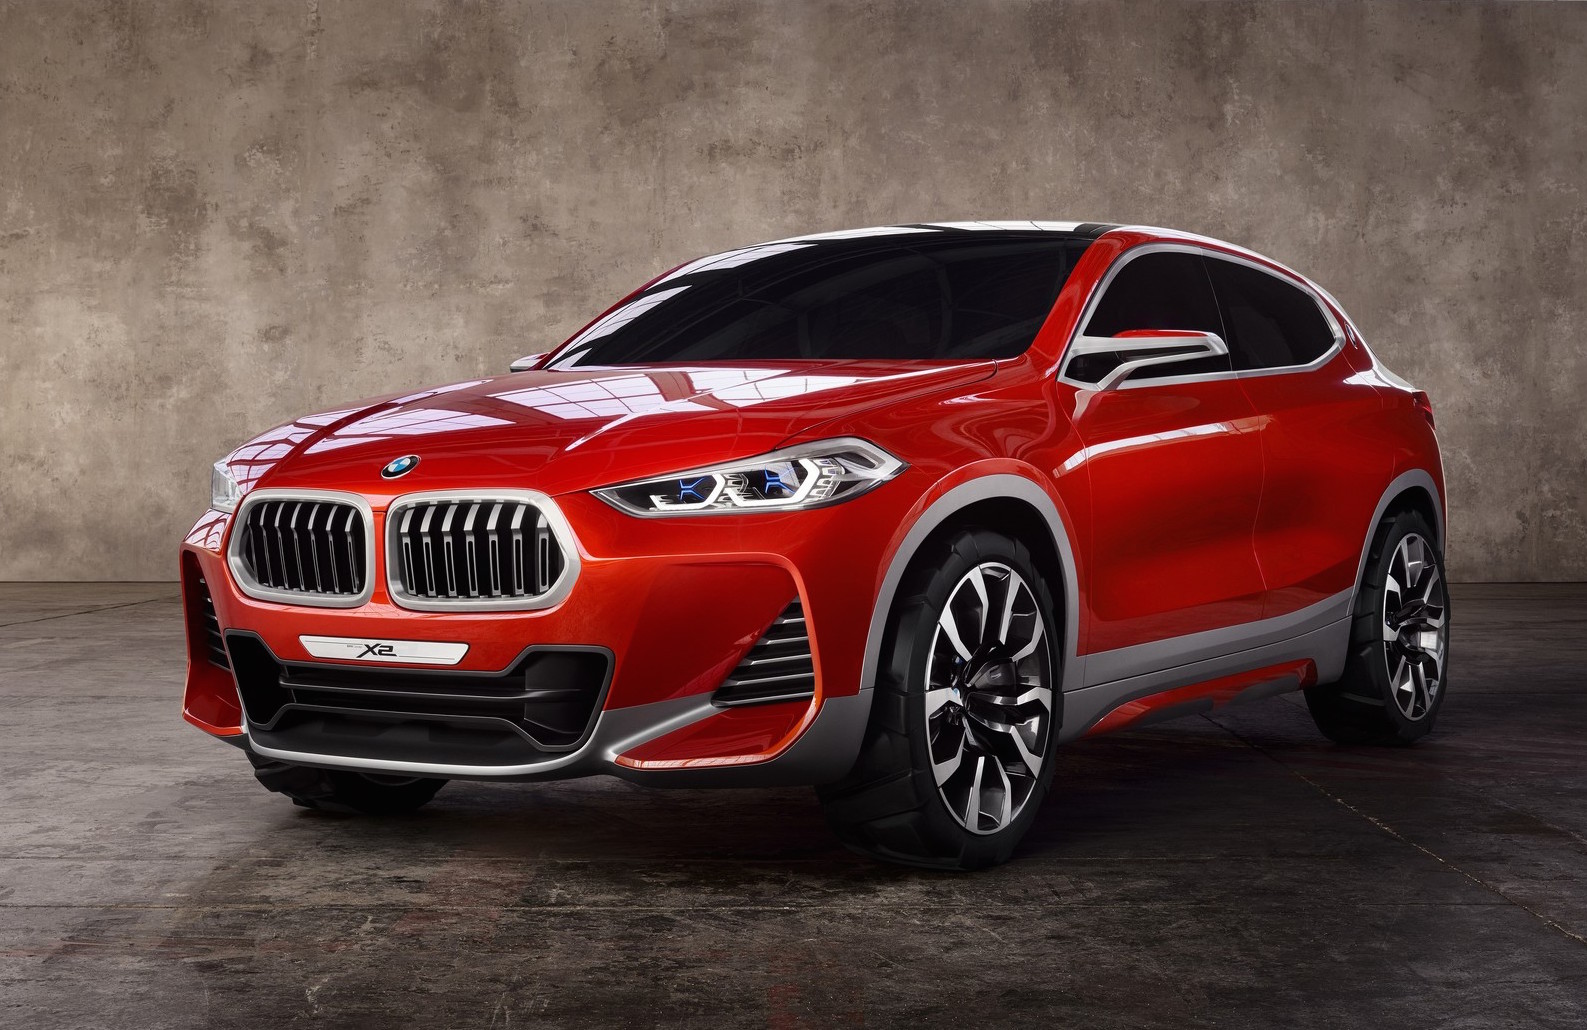 BMW X2 concept previews new compact coupe SUV